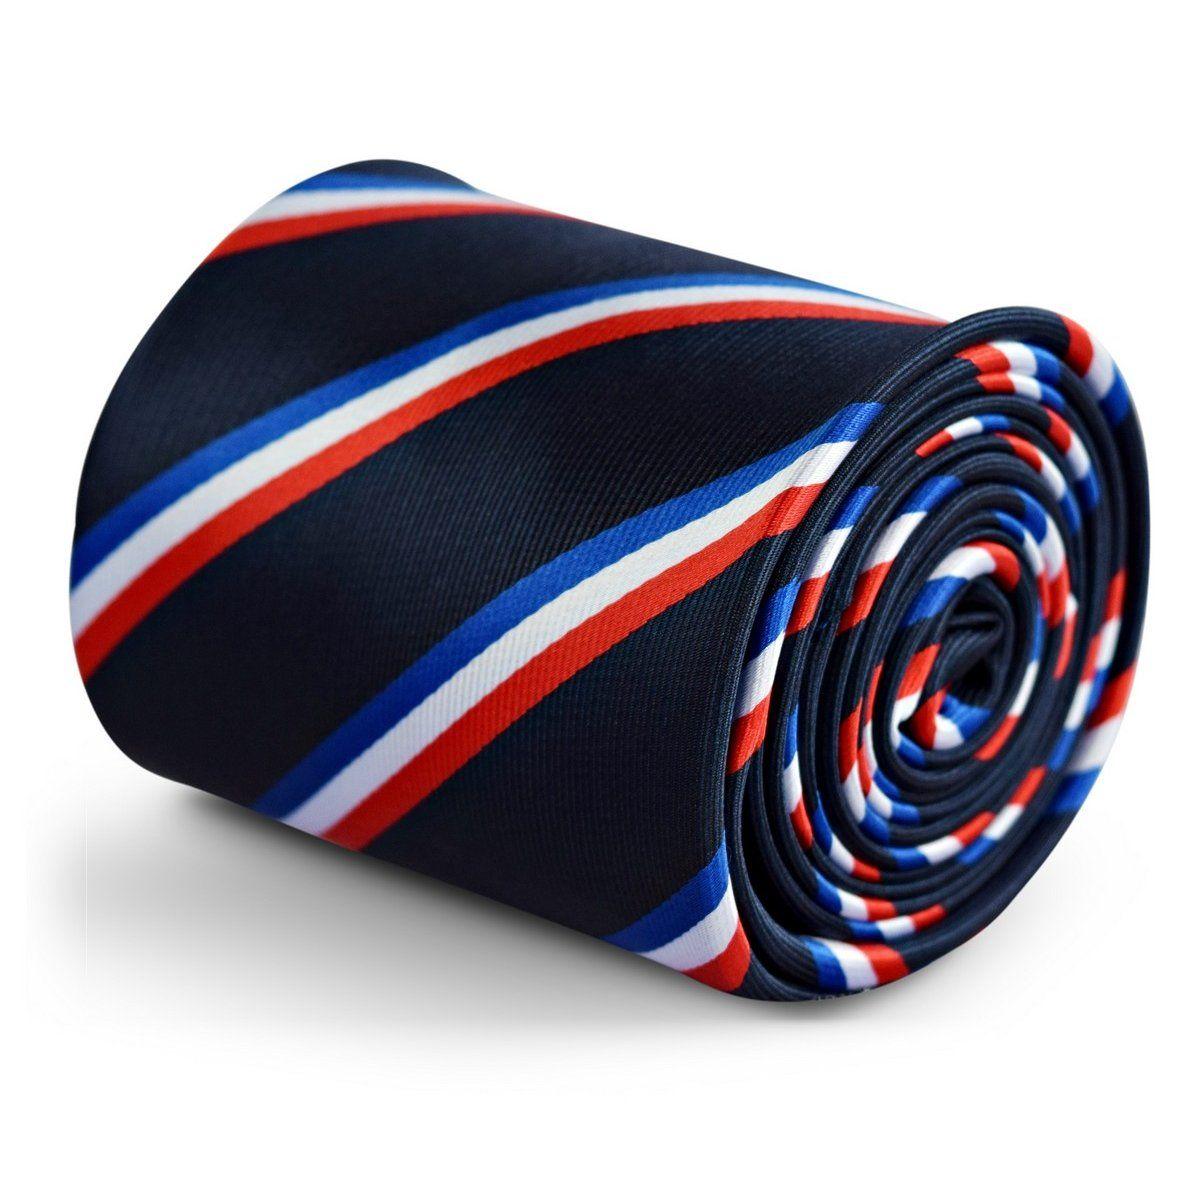 White and Blue Striped Logo - navy tie with French flag red white and blue design